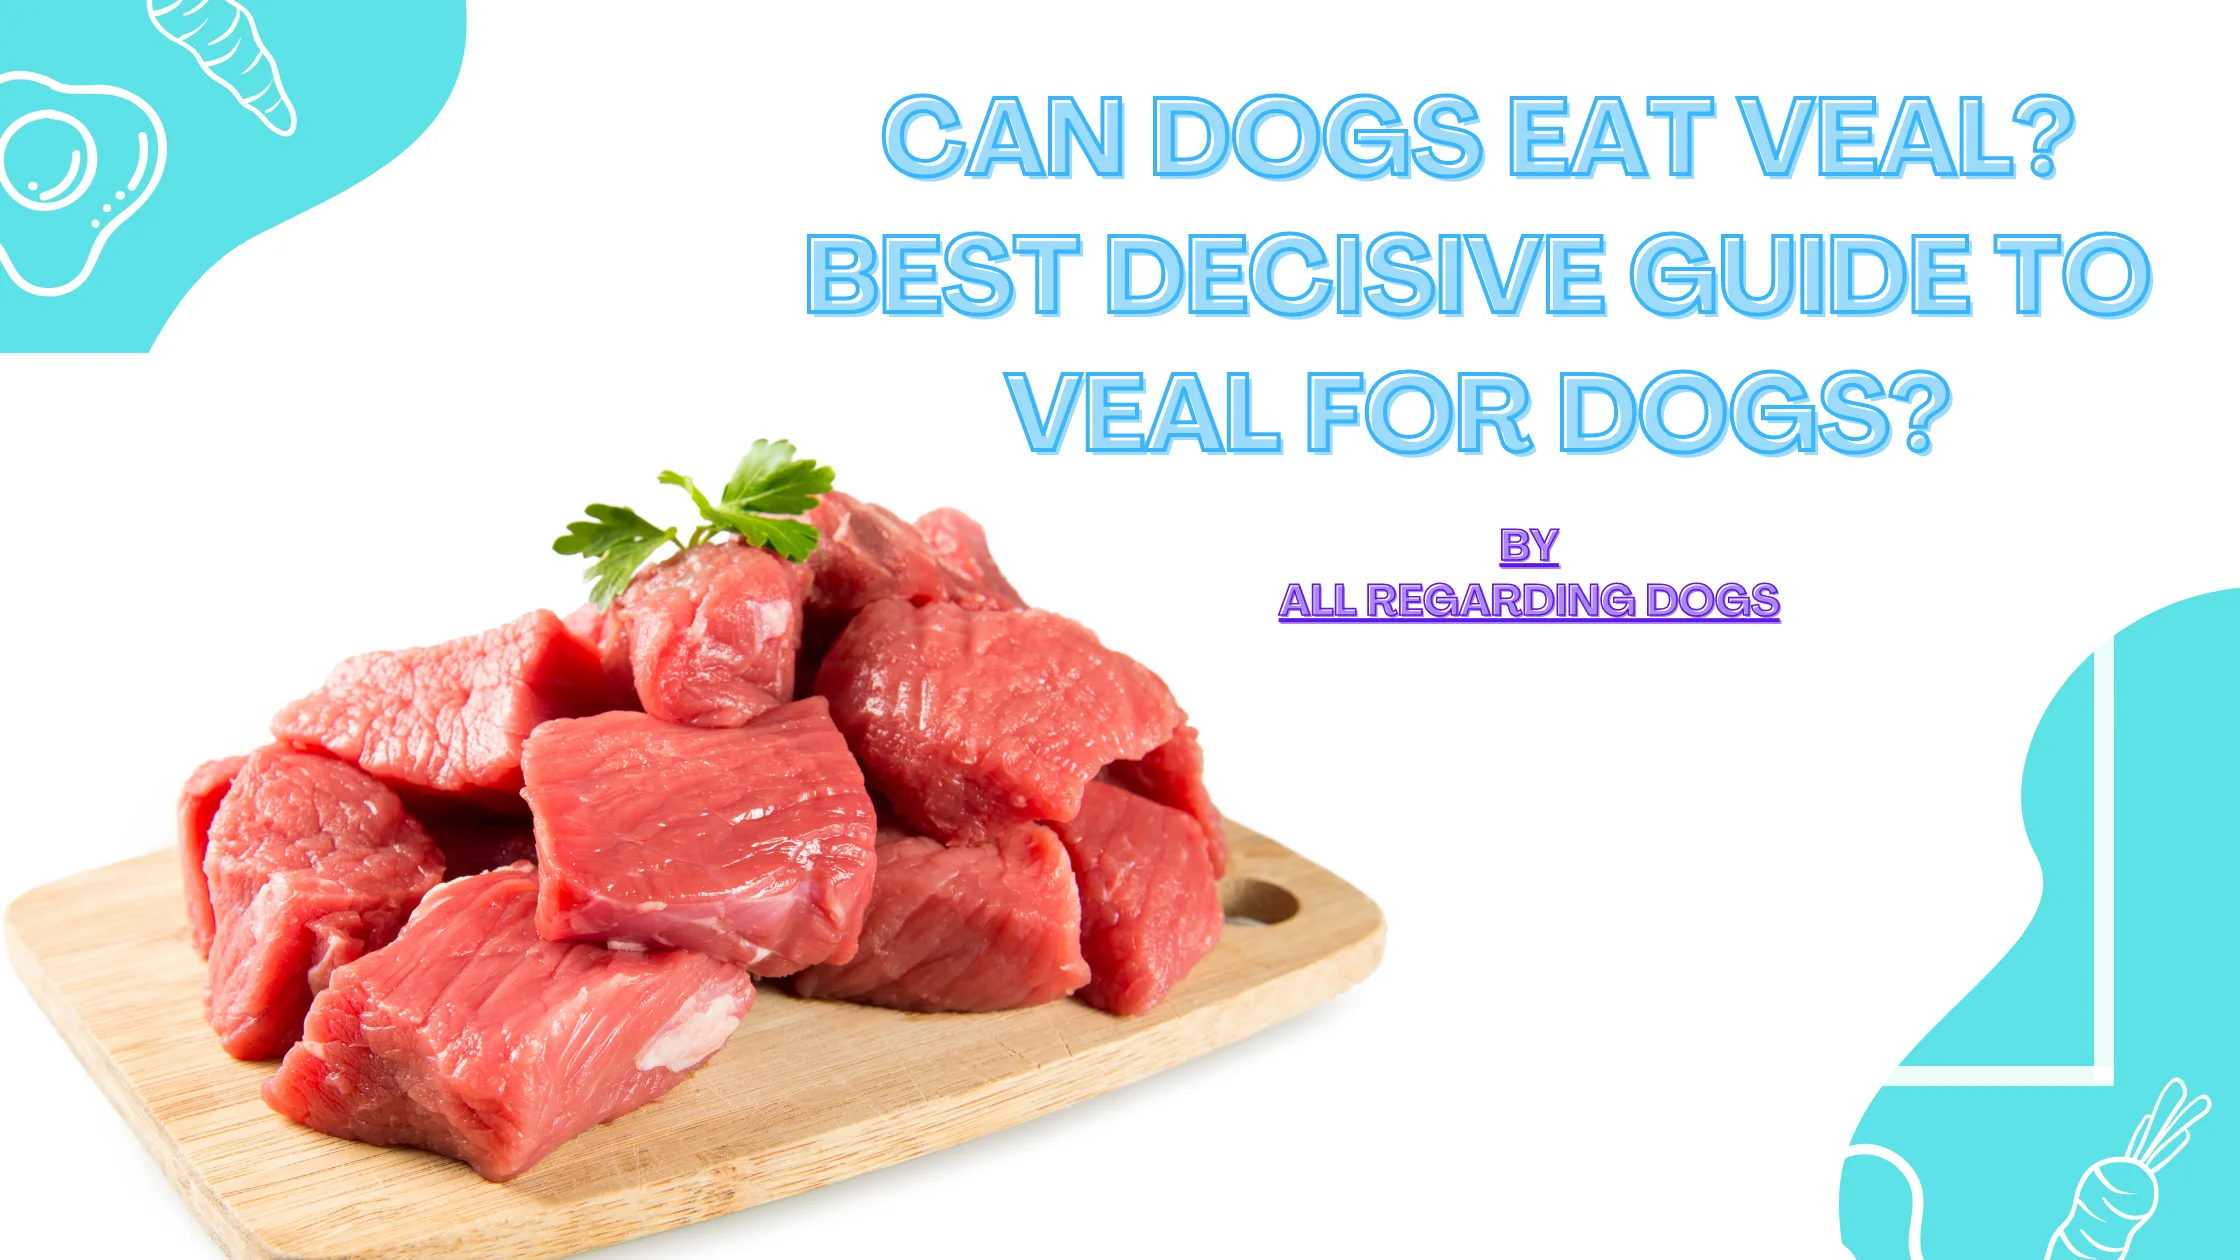 Can dogs eat veal?